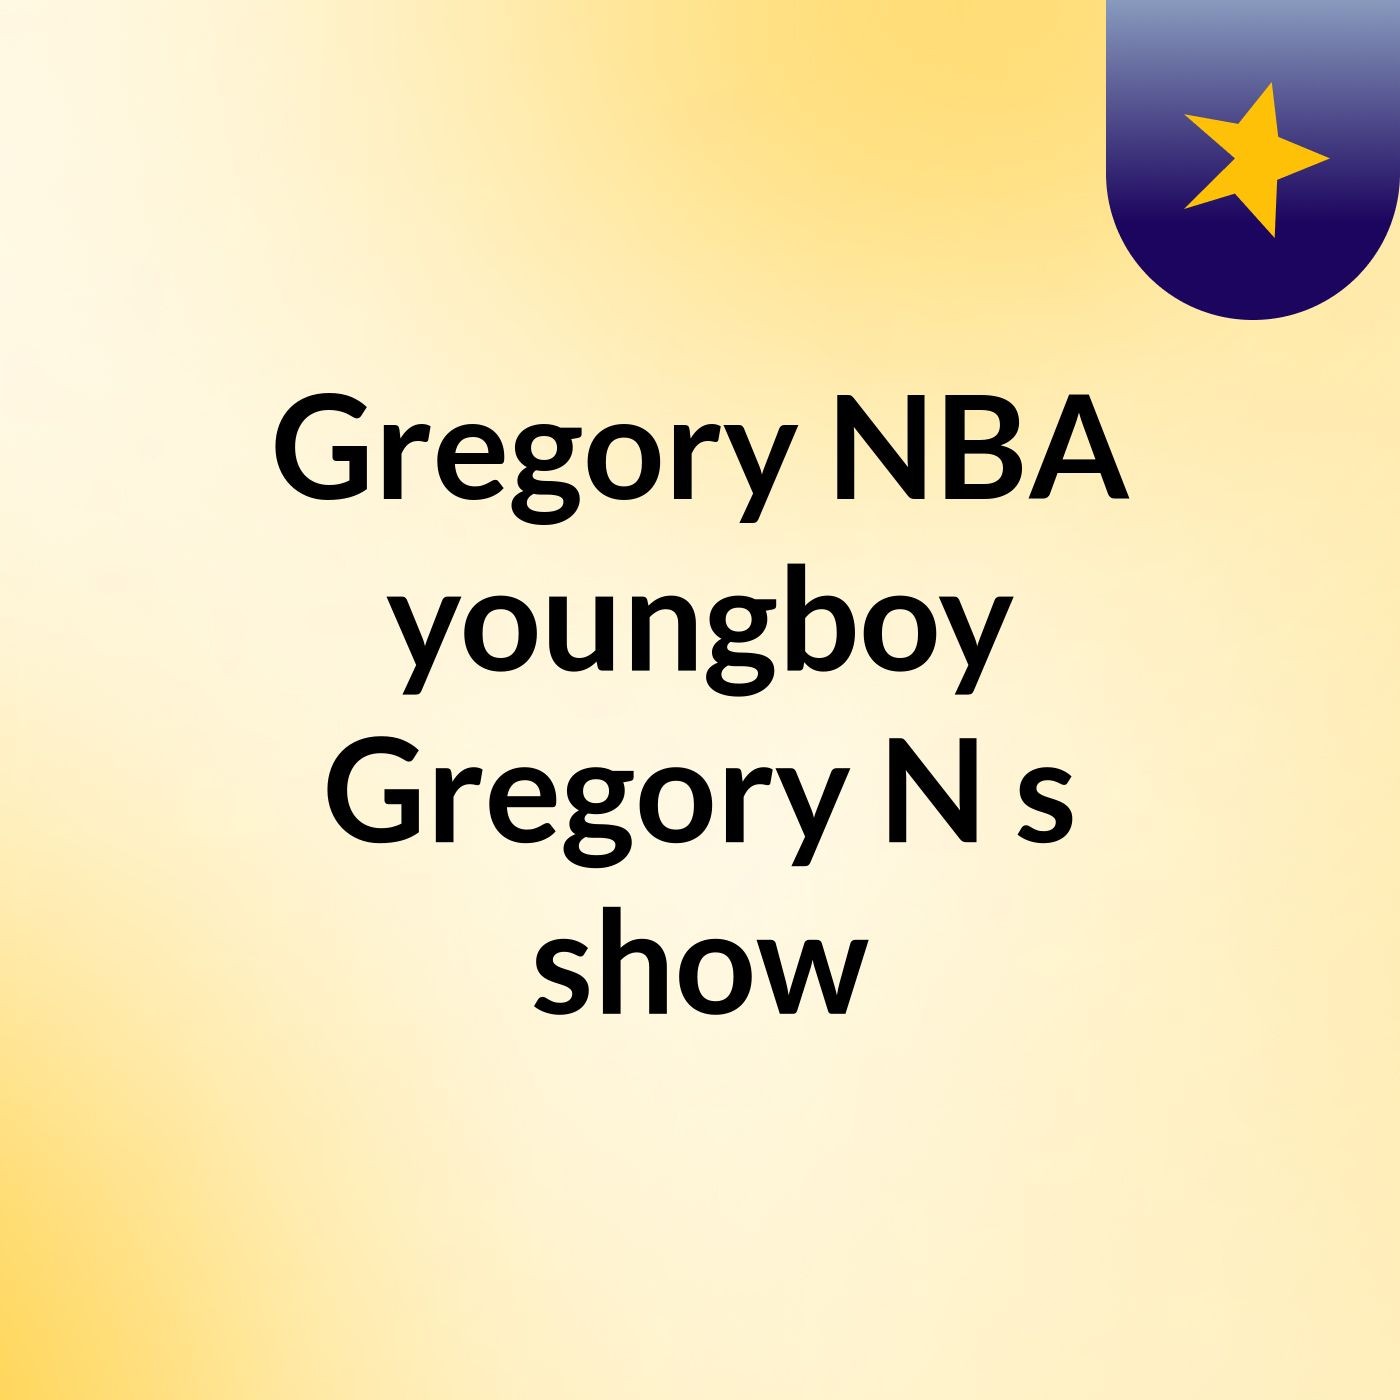 Gregory NBA youngboy Gregory N's show